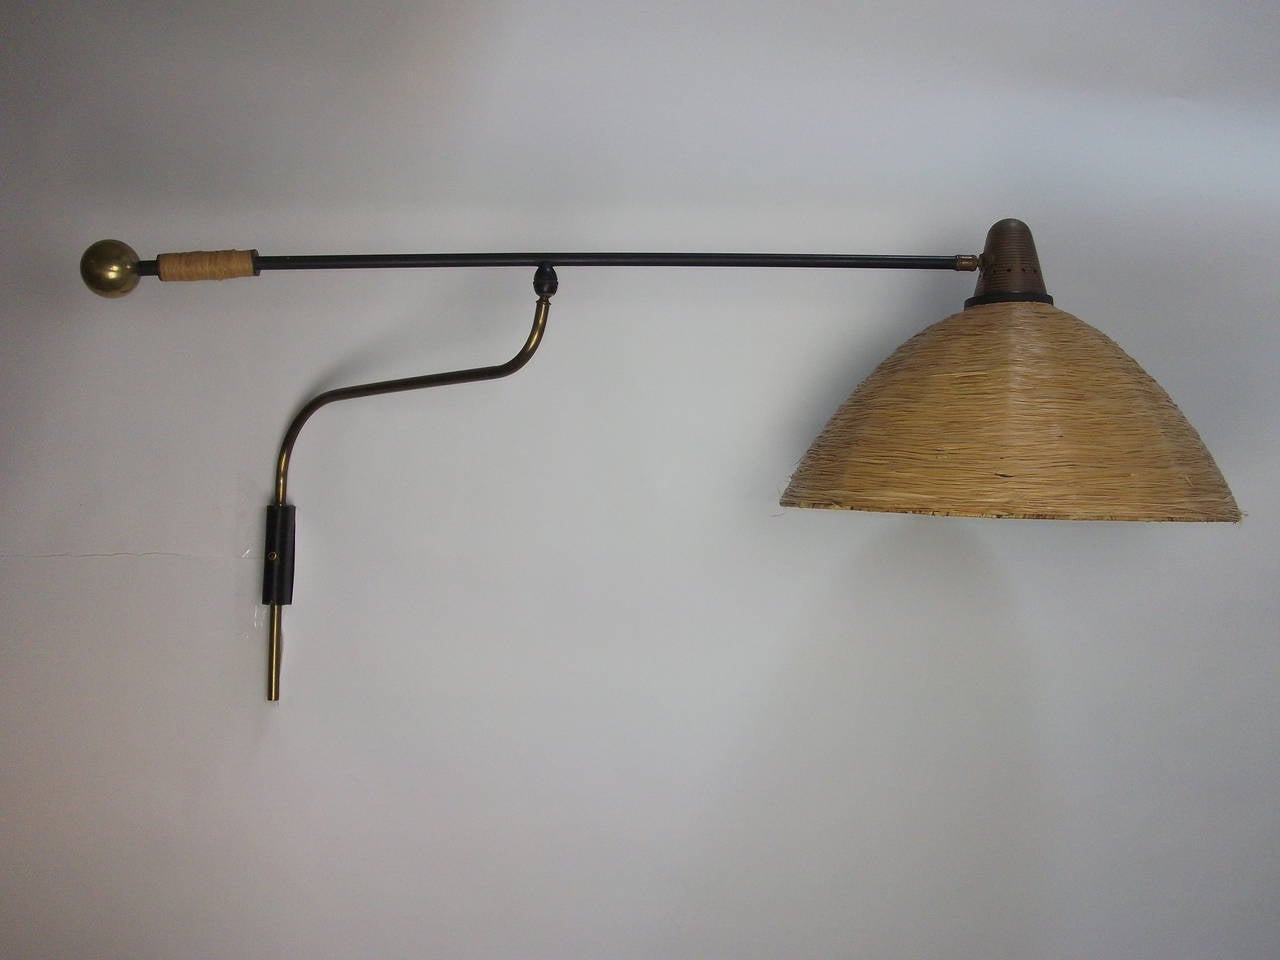 Incredibly well made and super unique Mid-century modern adjustable wall light. A real statement piece!!   Unknown maker and designer. Woven Rafia  shade and handle - quality brass and metal arm.
 Note: one small dent in one of the pics at the top